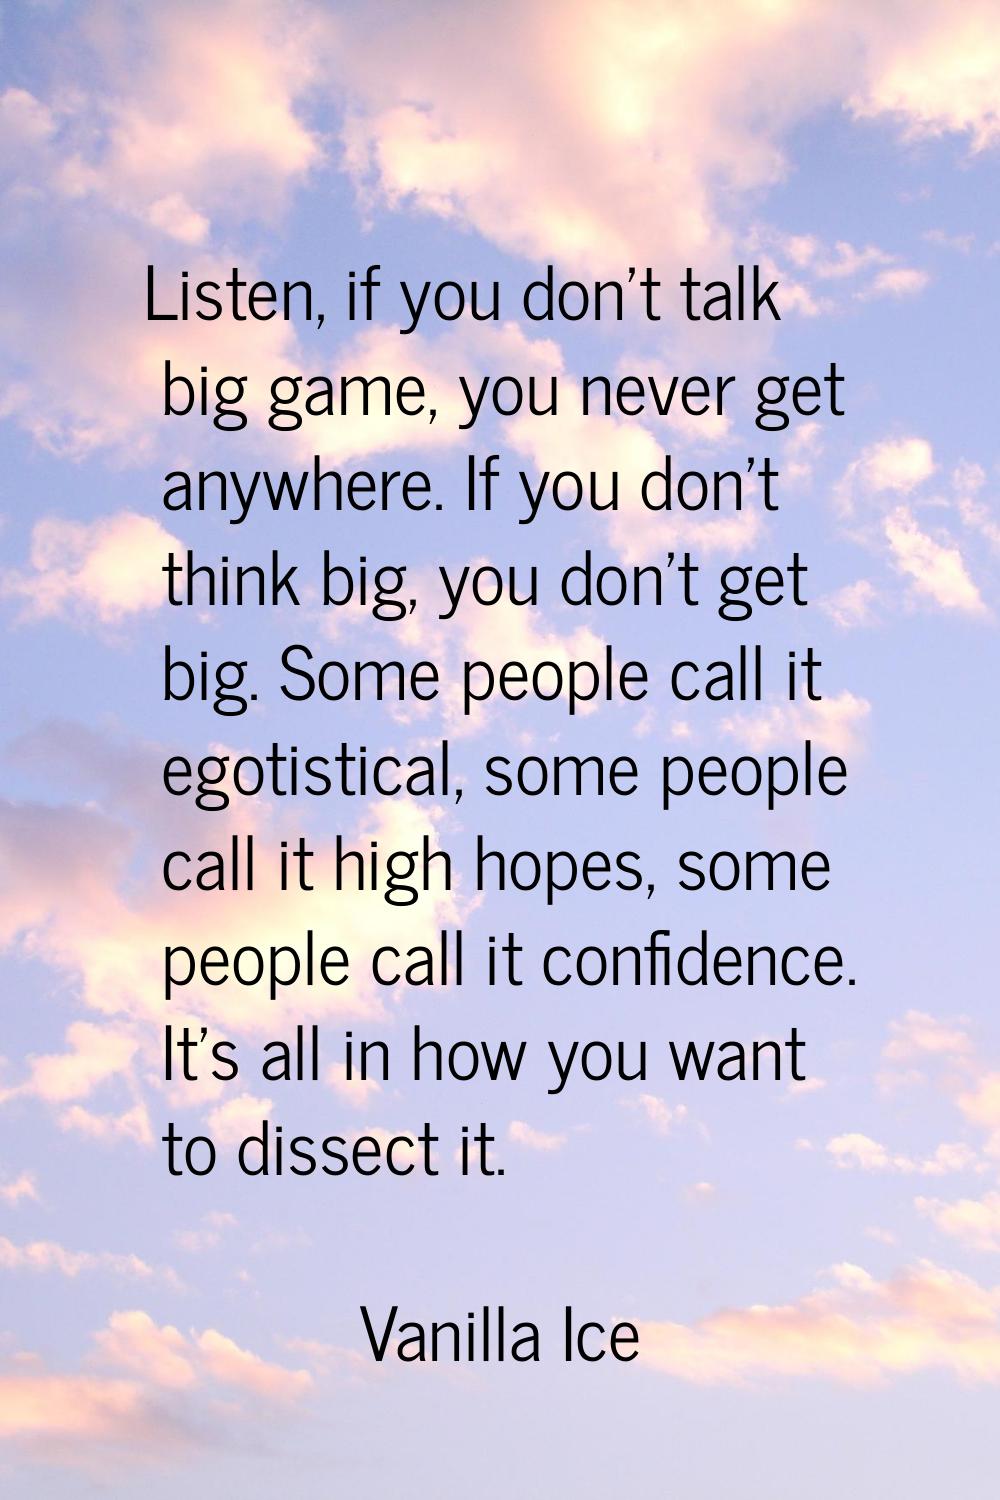 Listen, if you don't talk big game, you never get anywhere. If you don't think big, you don't get b